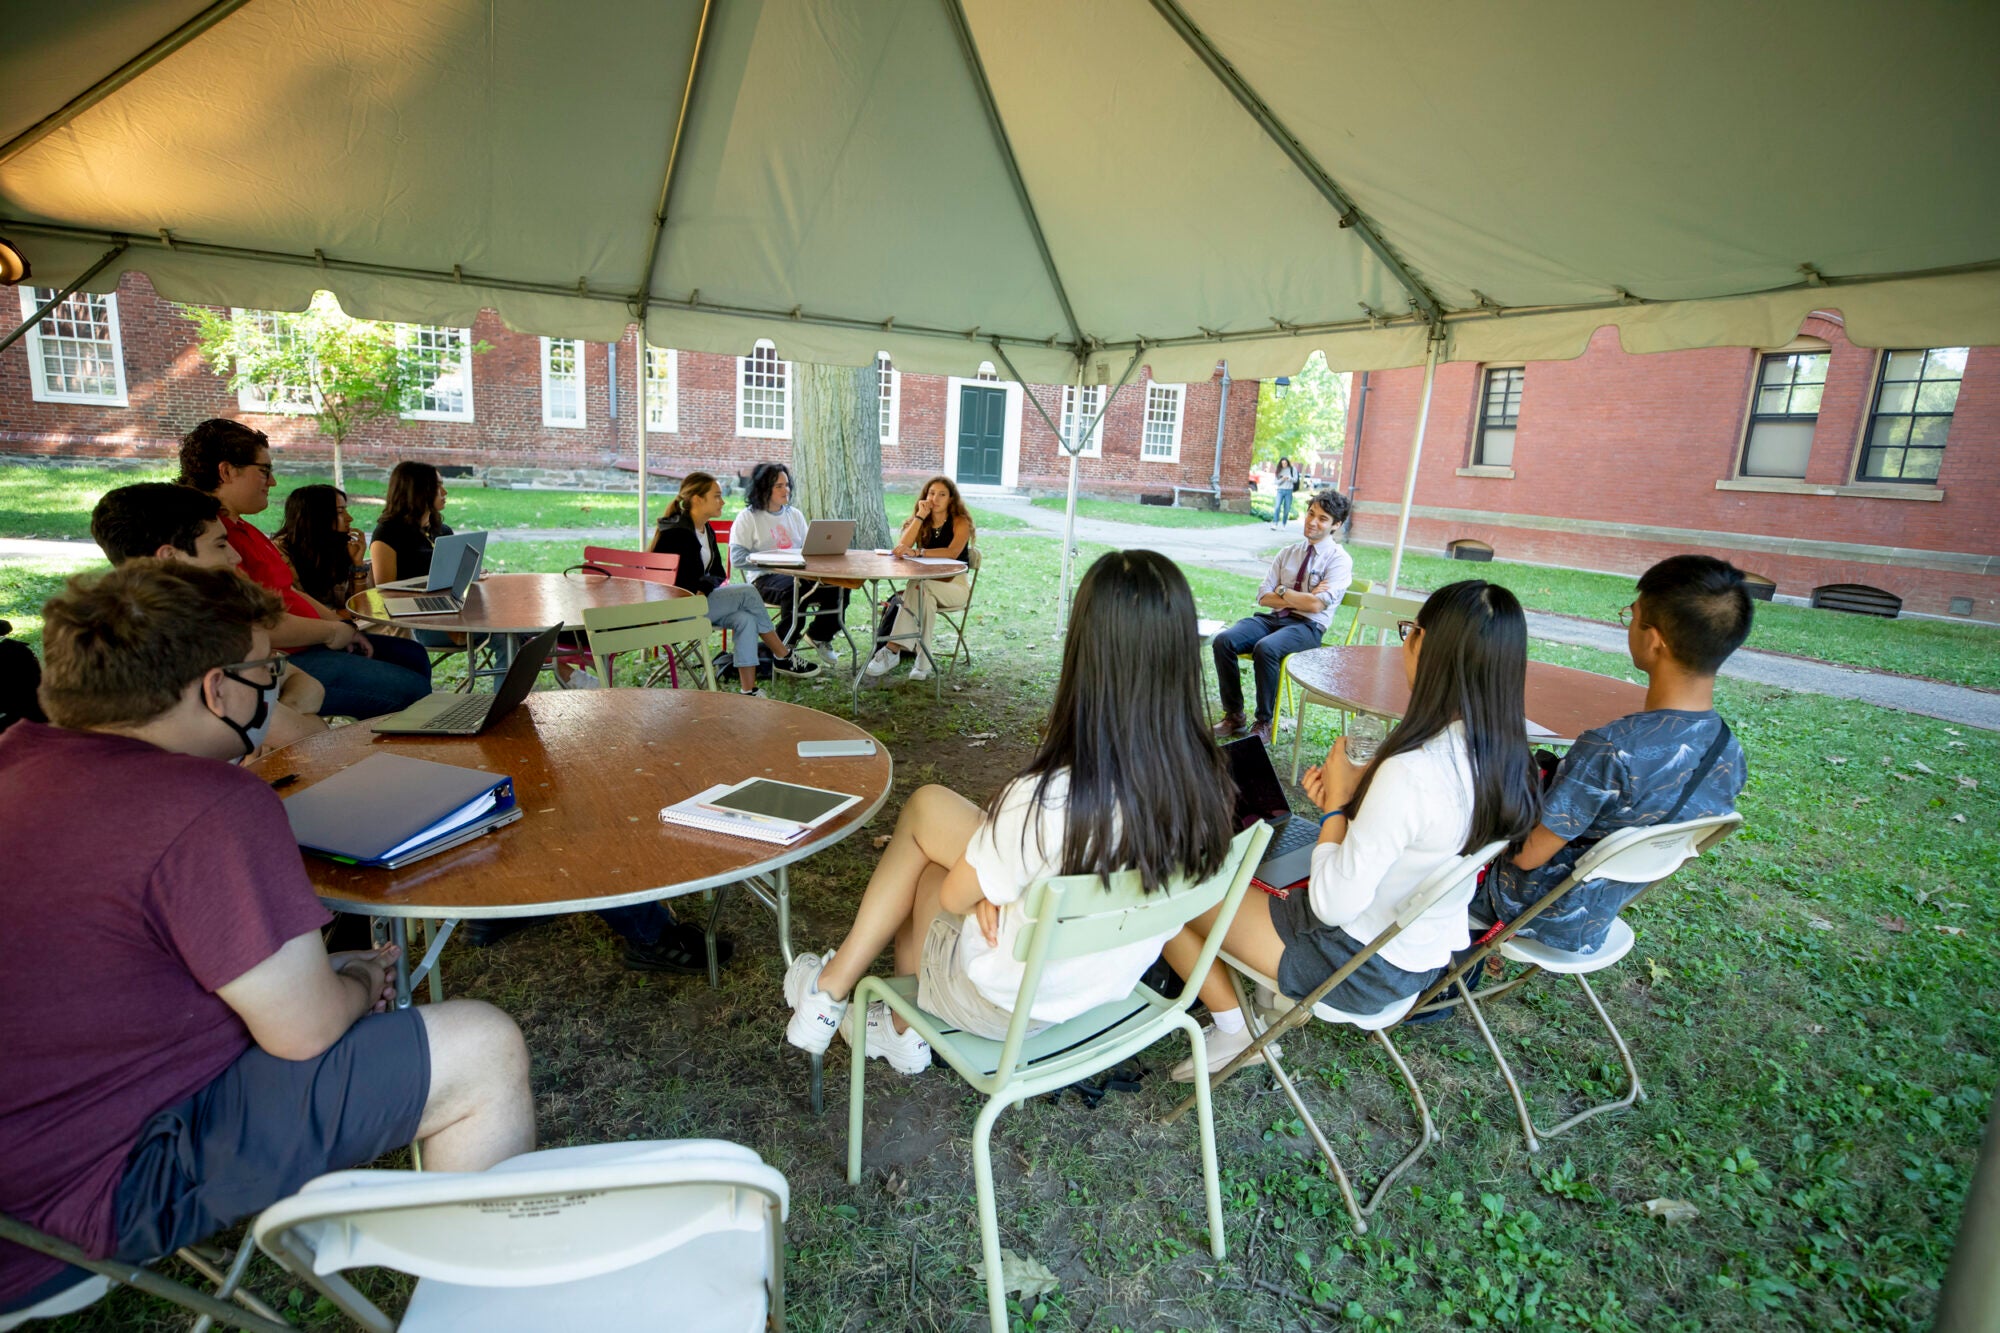 Students sit in chairs under a tent outside during class